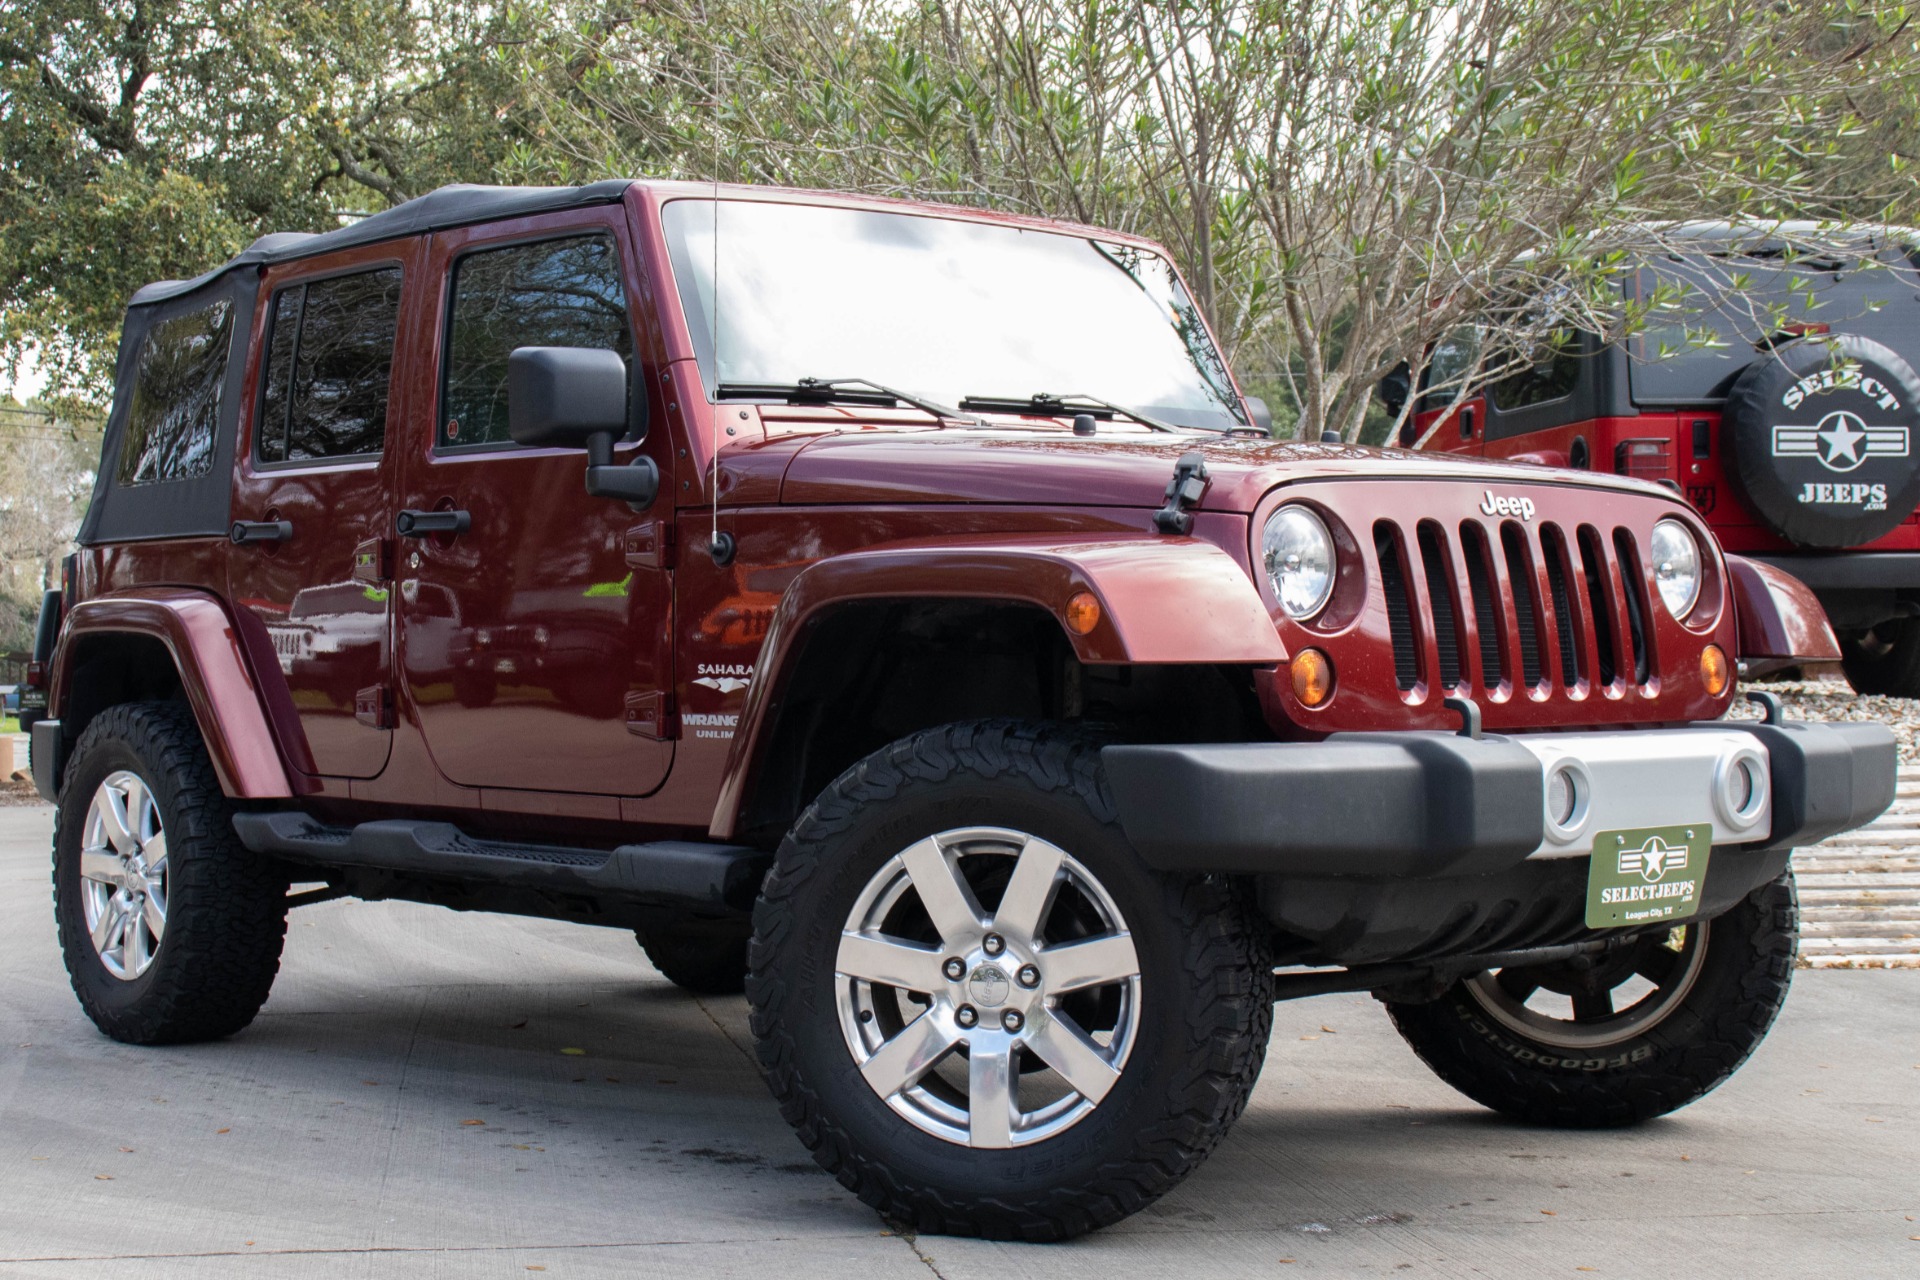 Used 2010 Jeep Wrangler Unlimited Sahara For Sale ($21,995) | Select Jeeps  Inc. Stock #115390